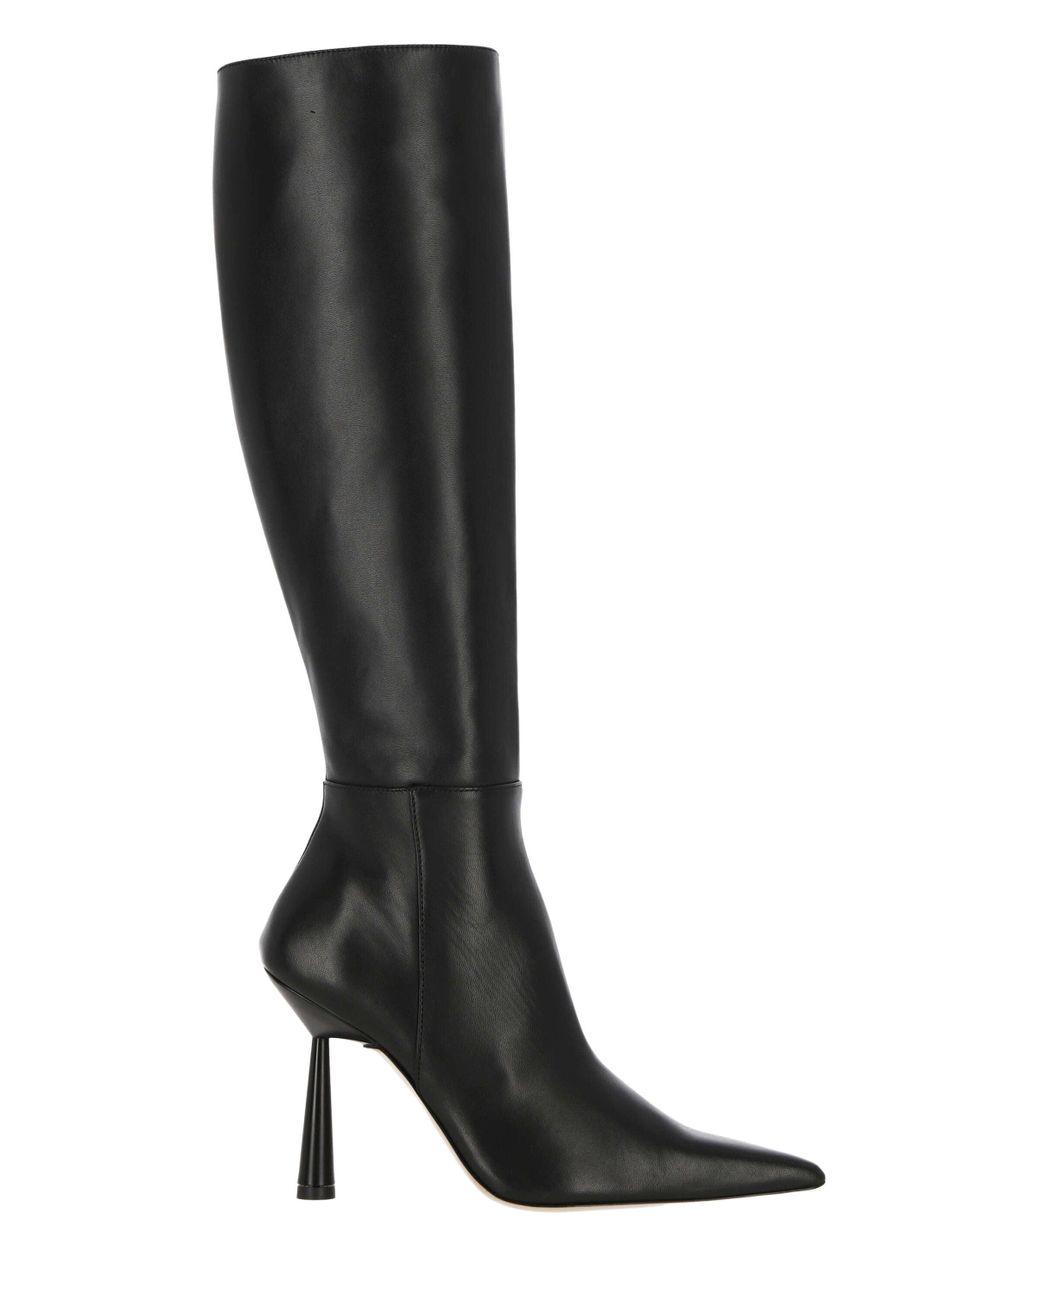 Gia Borghini Leather Knee-high Boots in Black | Lyst